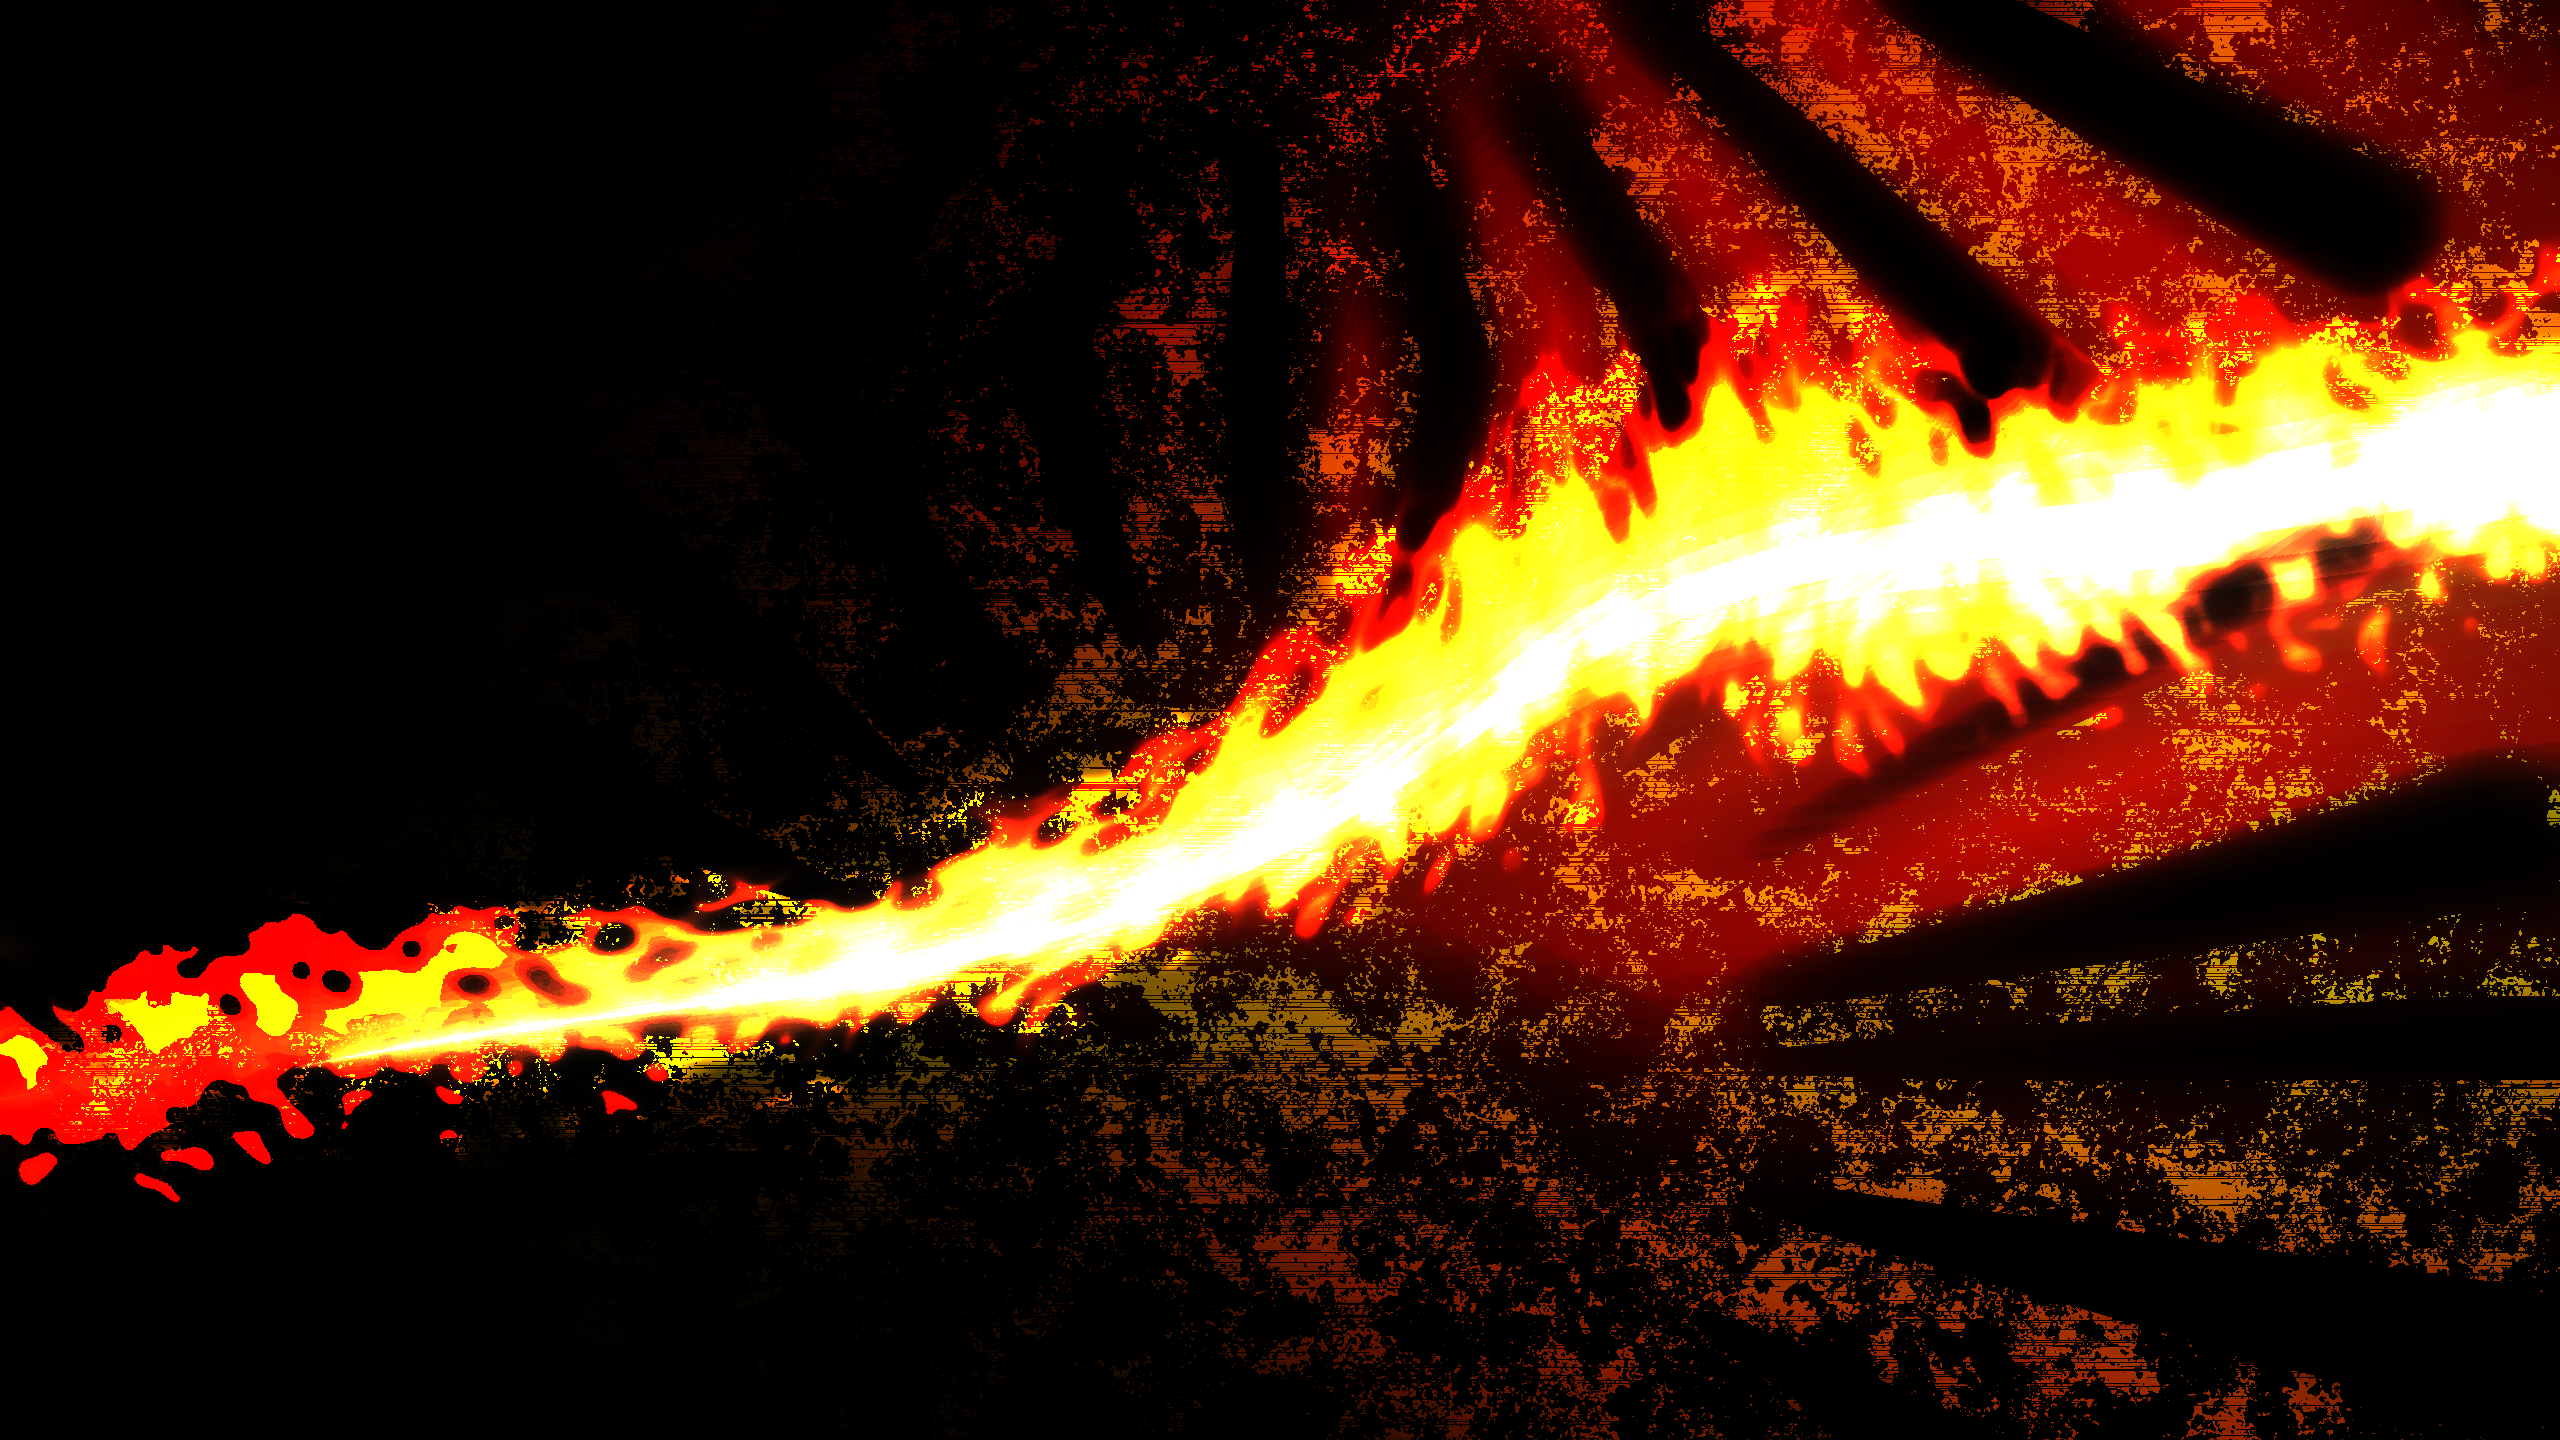 Abstract Fire Wallpaper by Game-BeatX14 on DeviantArt